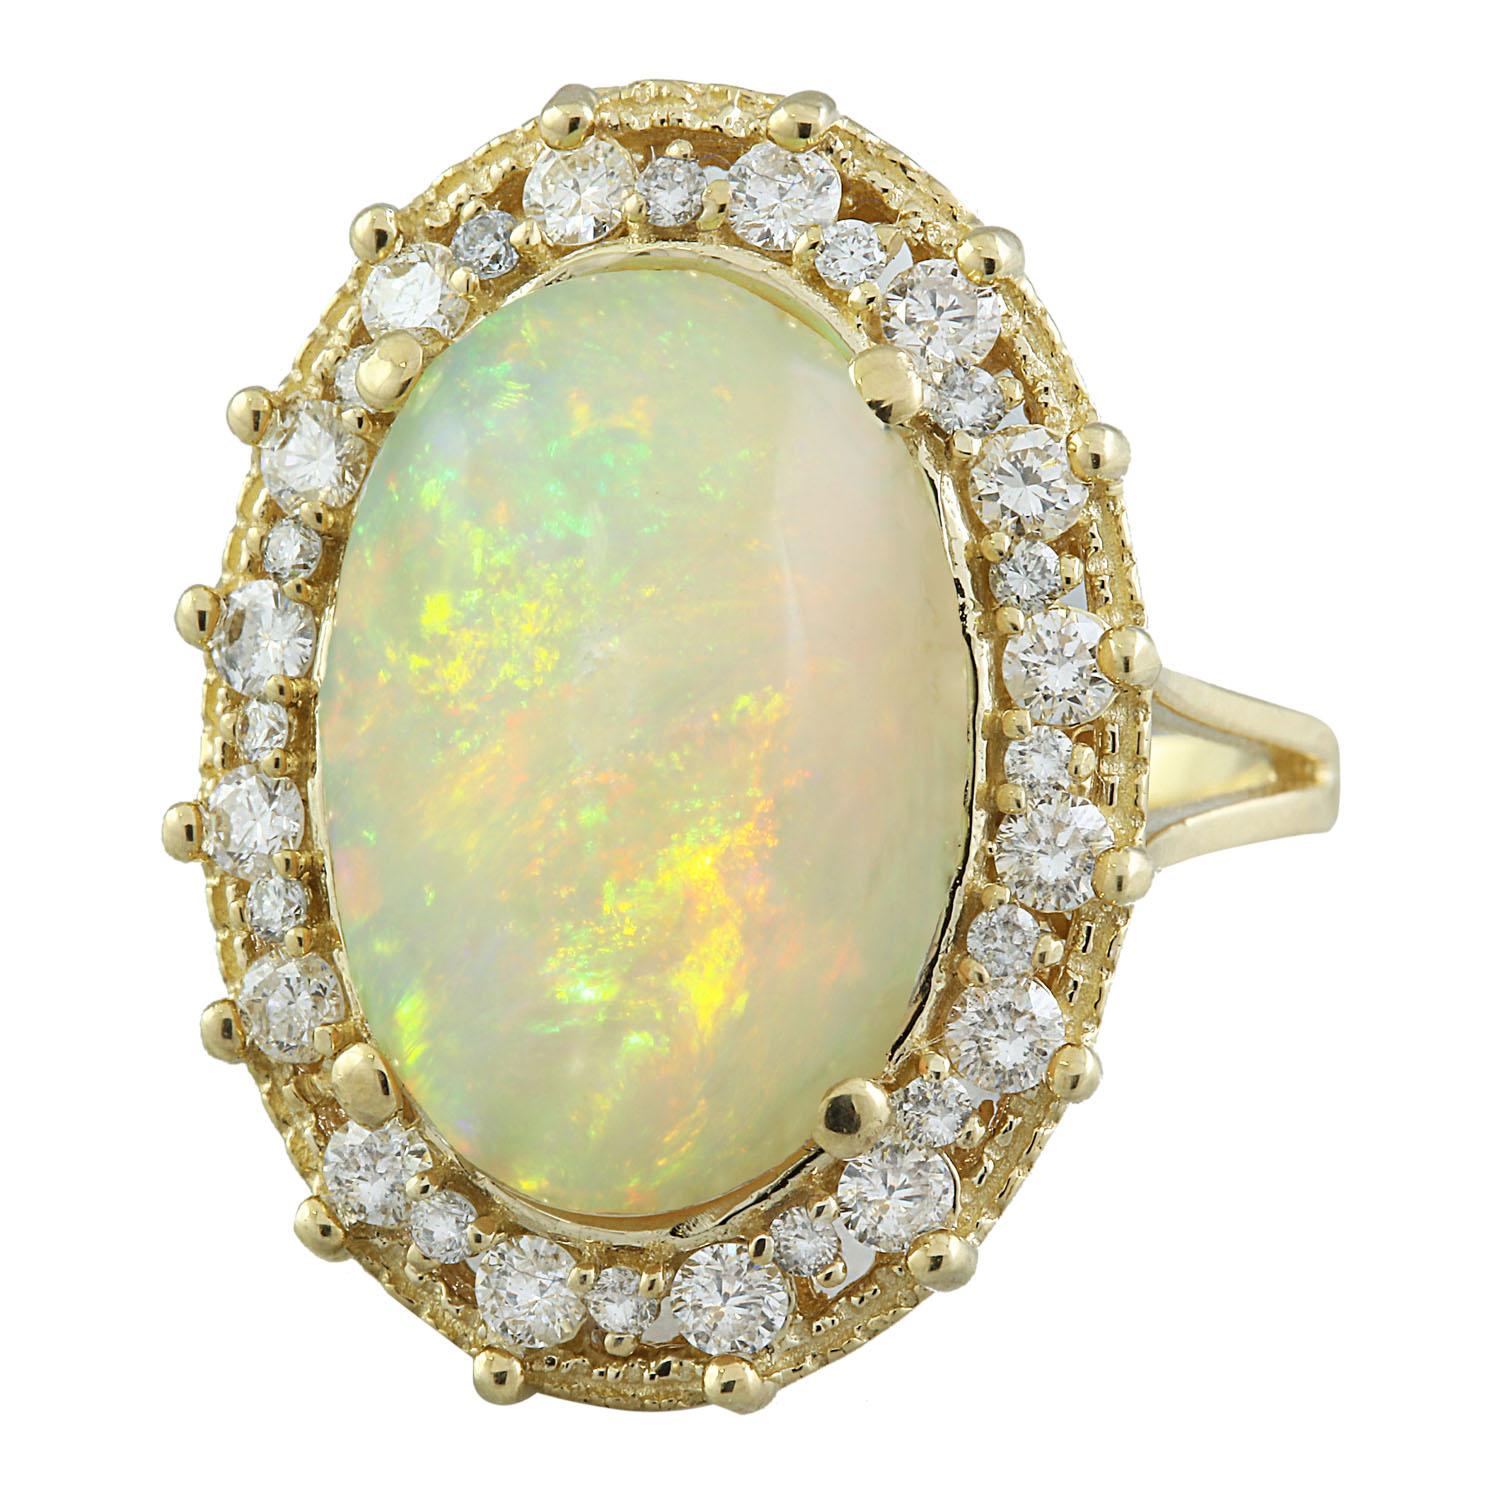 7.00 Carat Natural Opal 14 Karat Solid Yellow Gold Diamond Ring
Stamped: 14K 
Ring Size: 7 
Total Ring Weight: 9.4 Grams 
Opal  Weight: 6.00 Carat (17.00x12.00 Millimeter)
Diamond Weight: 1.00 Carat (F-G Color, VS2-SI1 Clarity)
Quantity: 32
Face